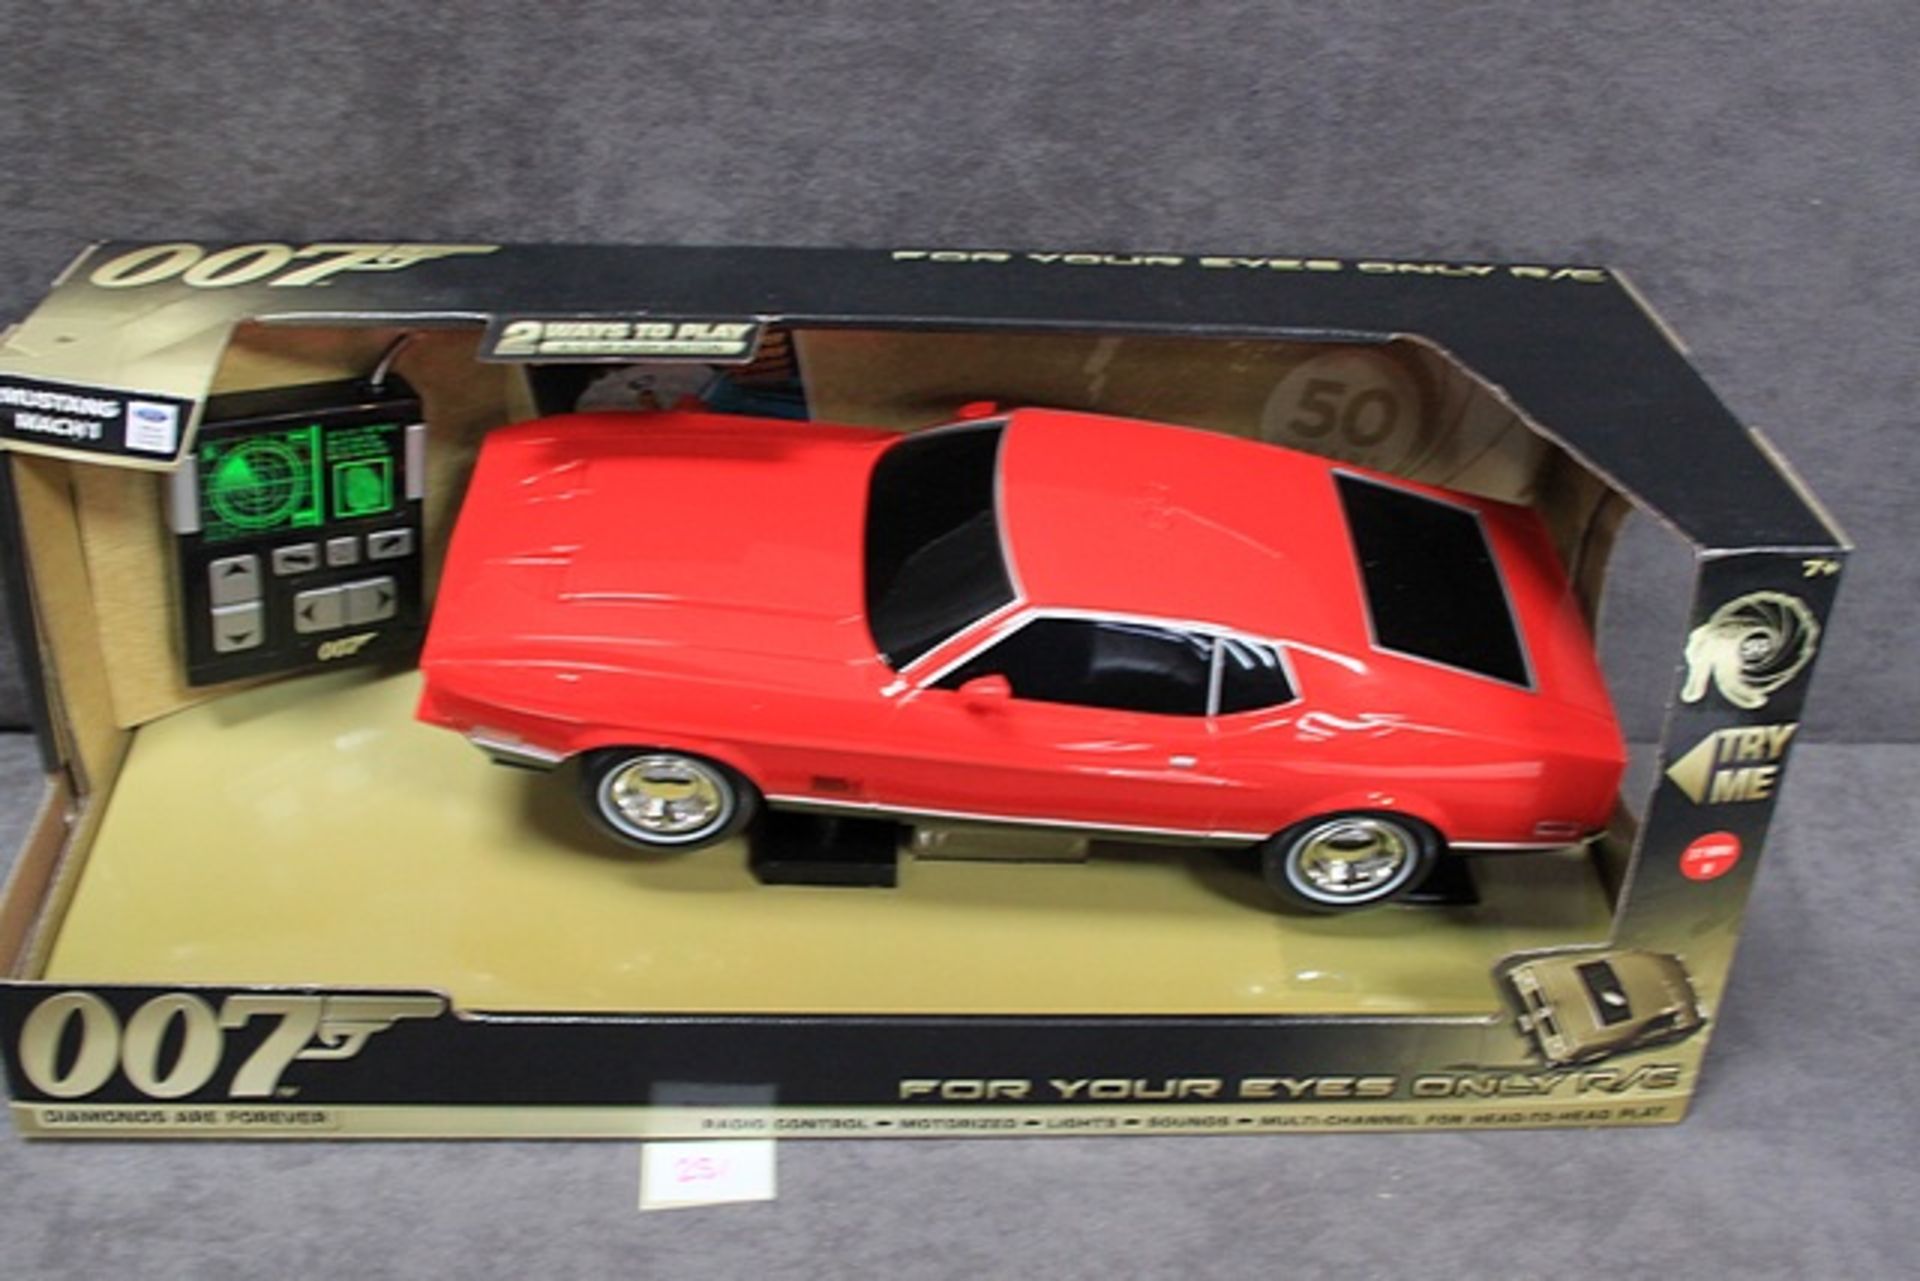 Toy State 007 Diamonds are forever - For Your Eyes Only Radio Control Mustang Mach 1 in box